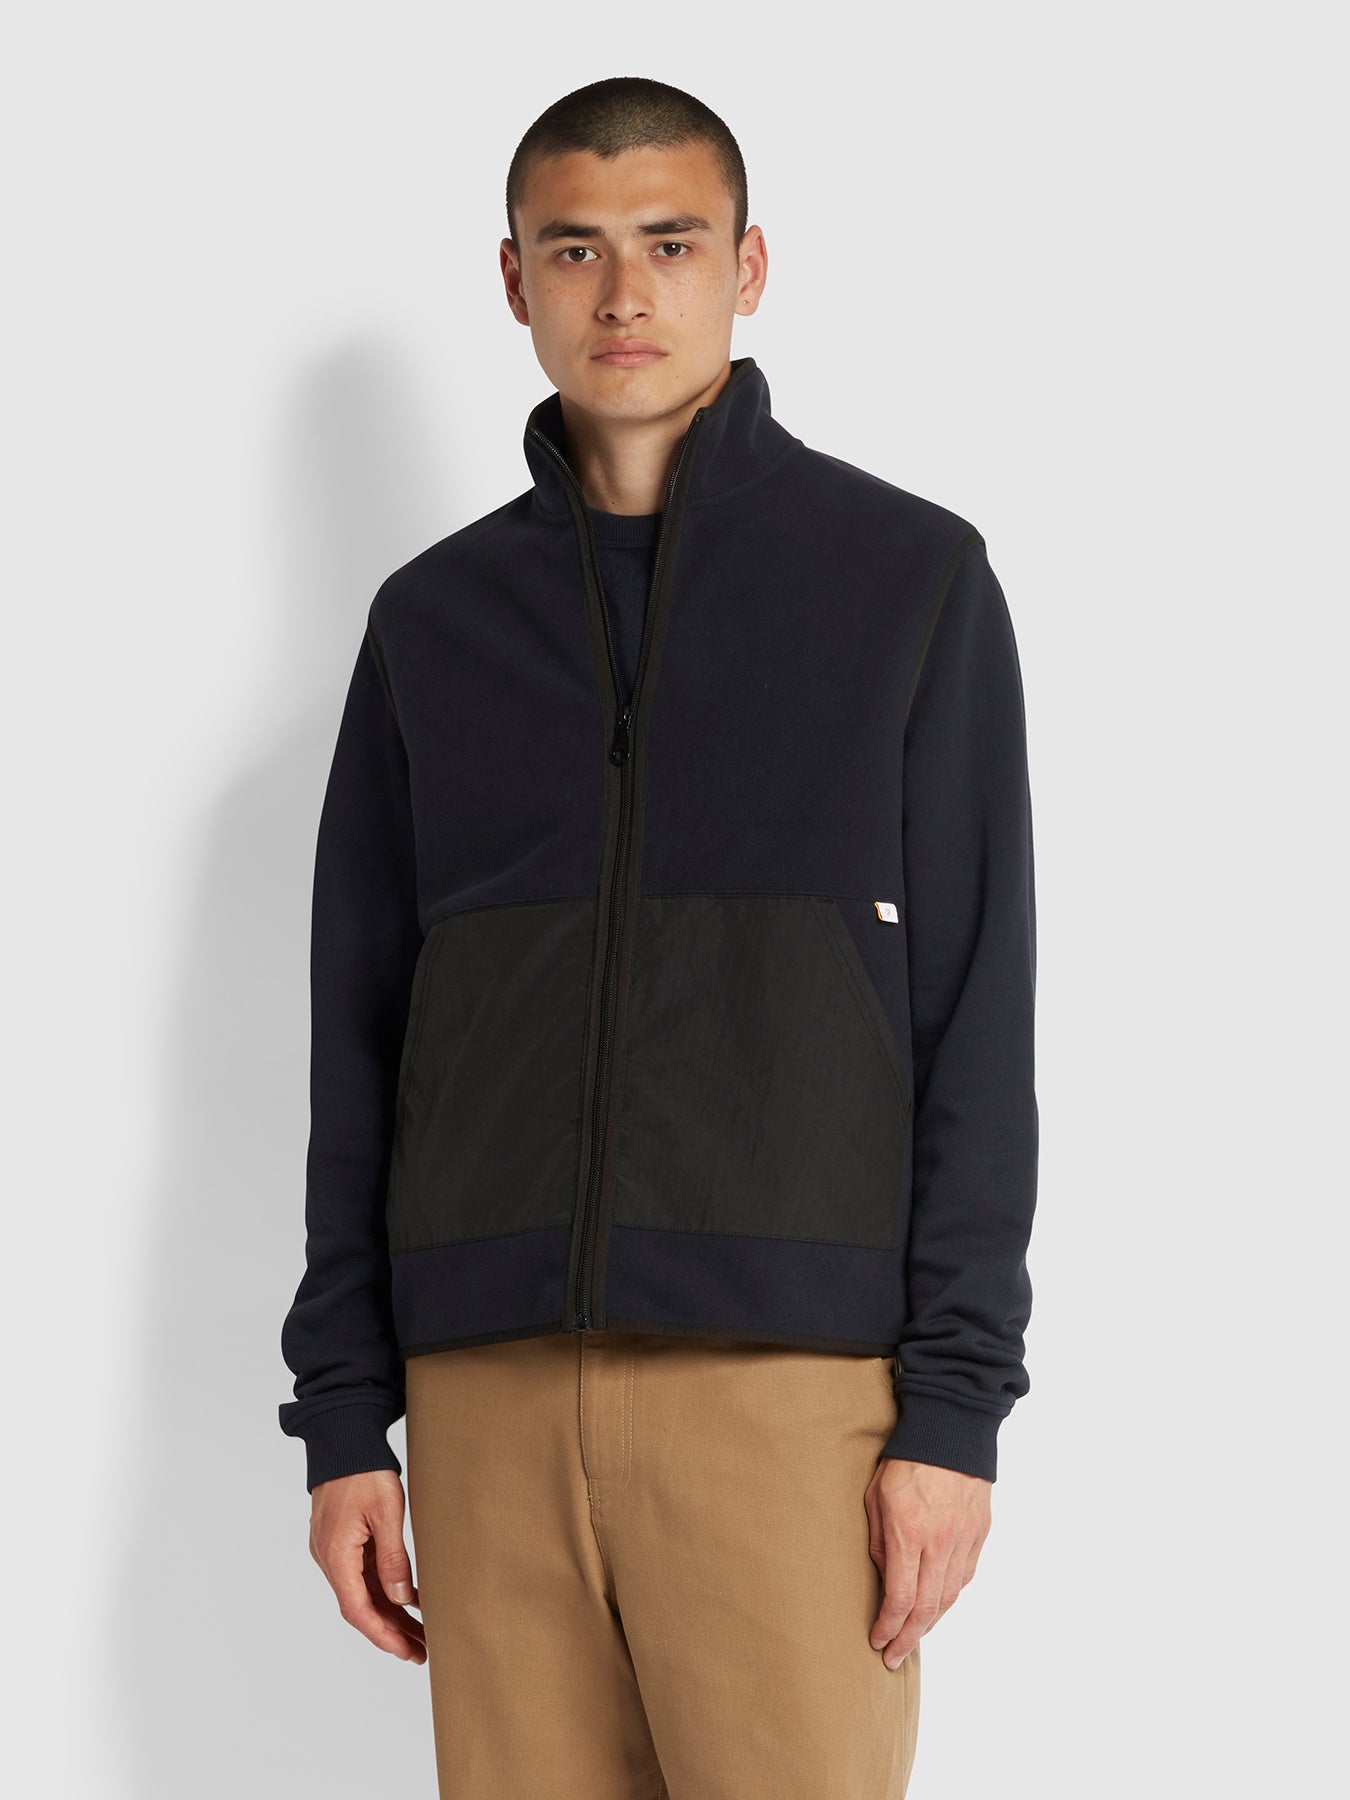 View Caldwell Gilet In True Navy information